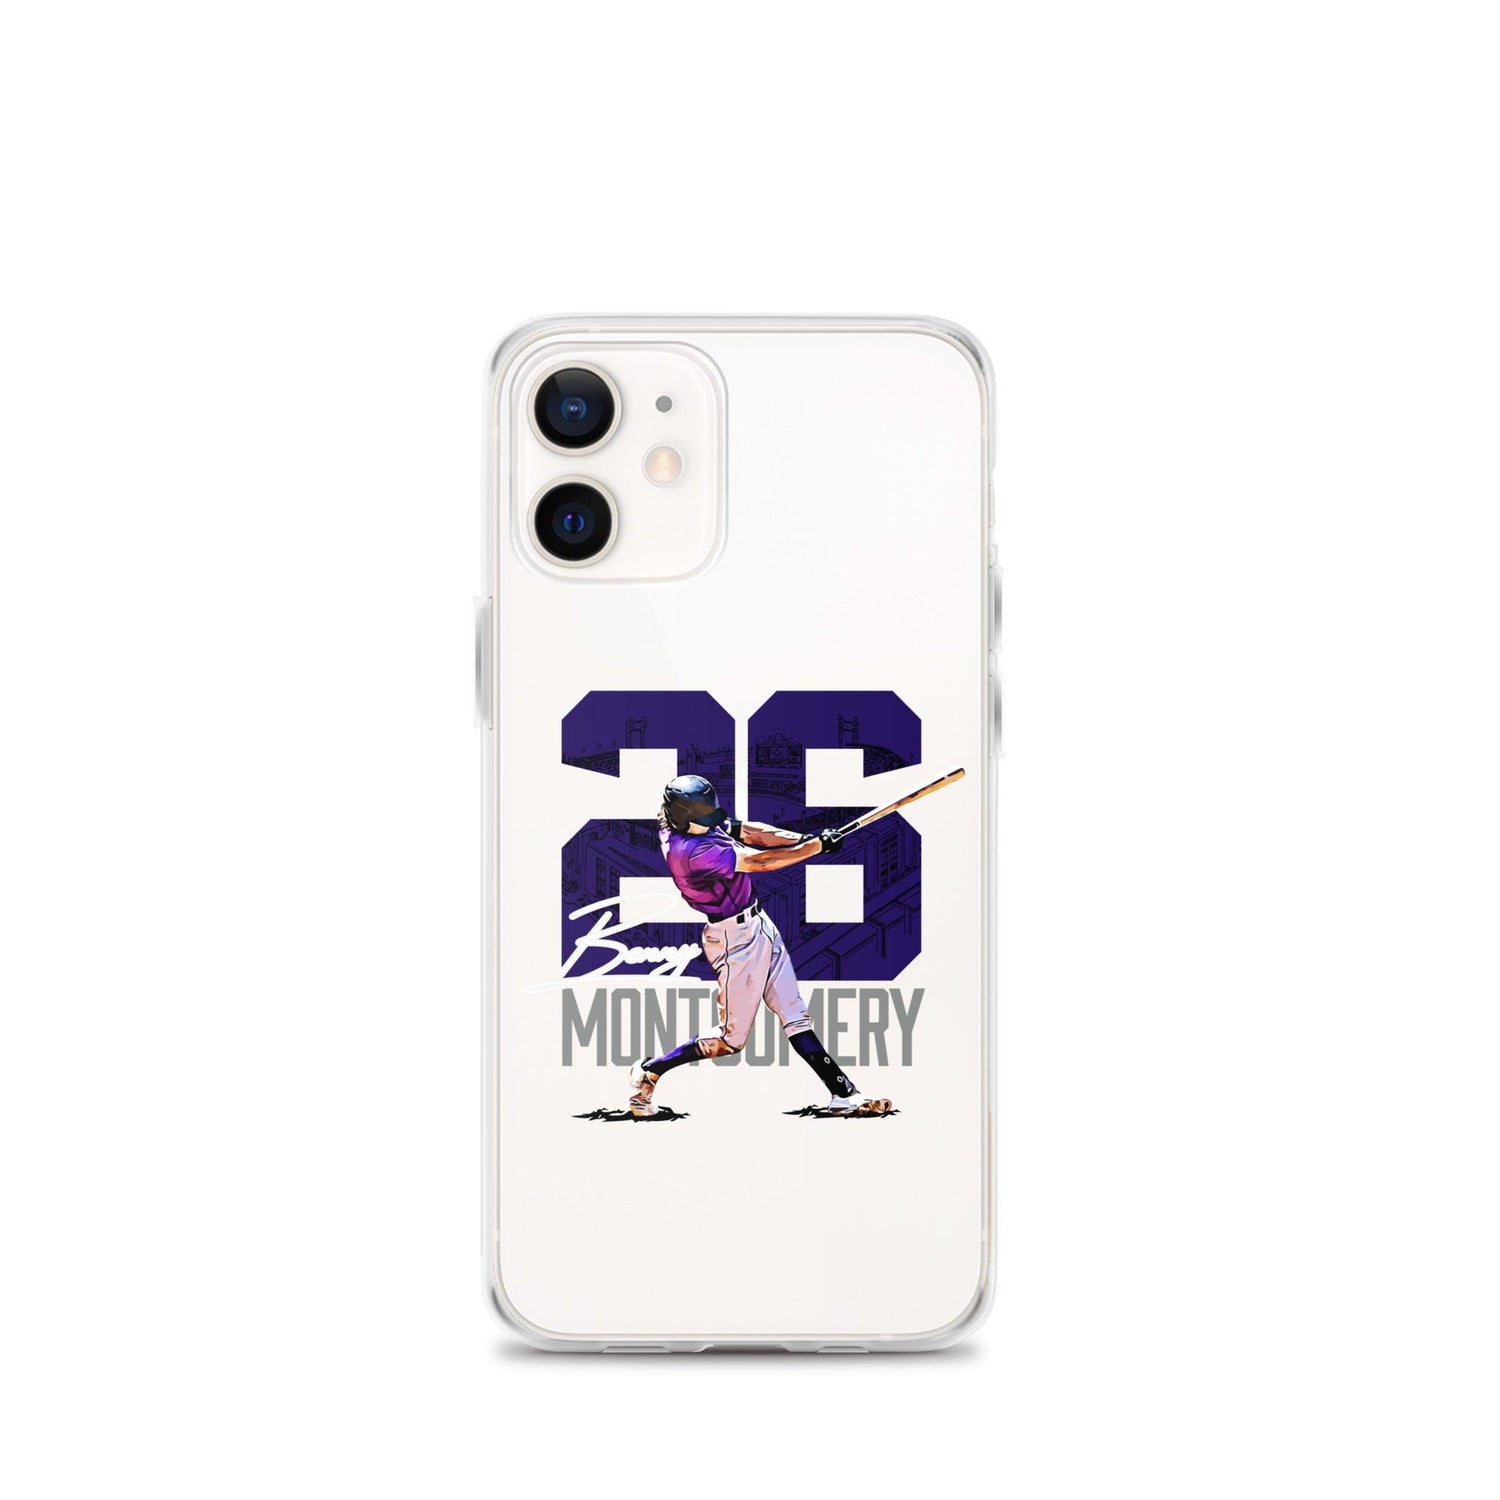 Benny Montgomery "Gameday" iPhone Case - Fan Arch